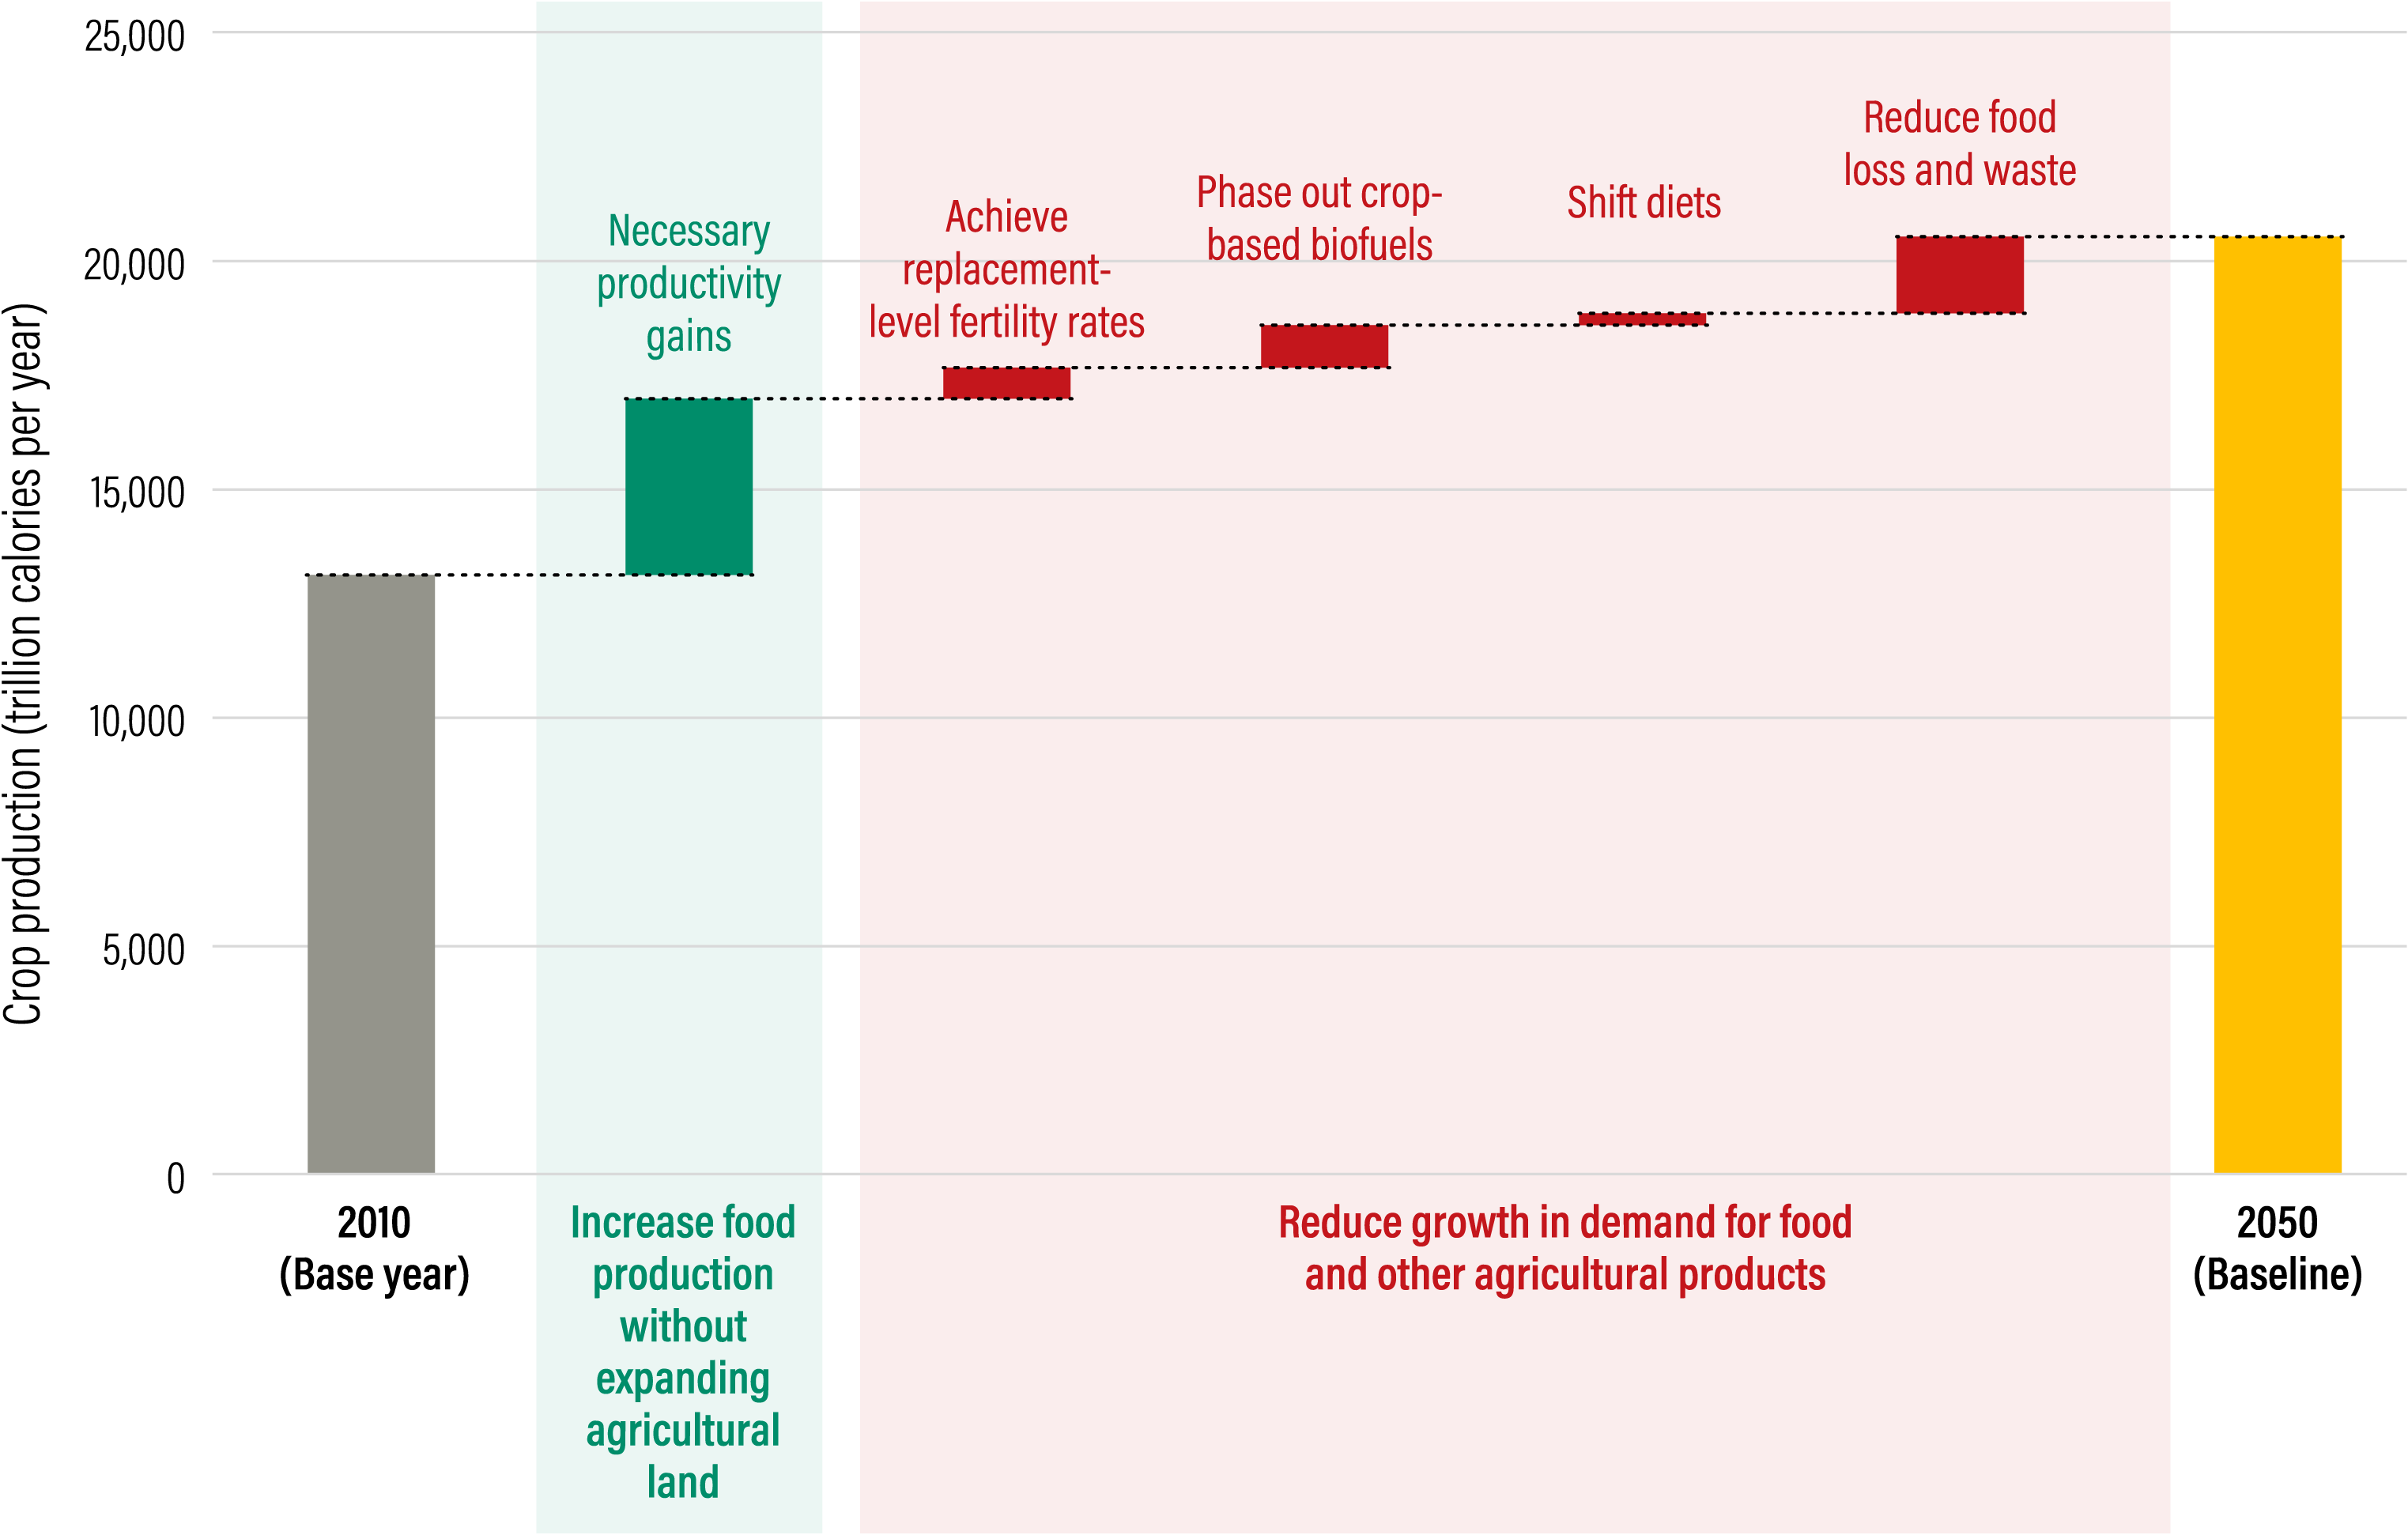 Under the Breakthrough Technologies scenario, the amount of additional food needed to feed the world in 2050 could be cut by half